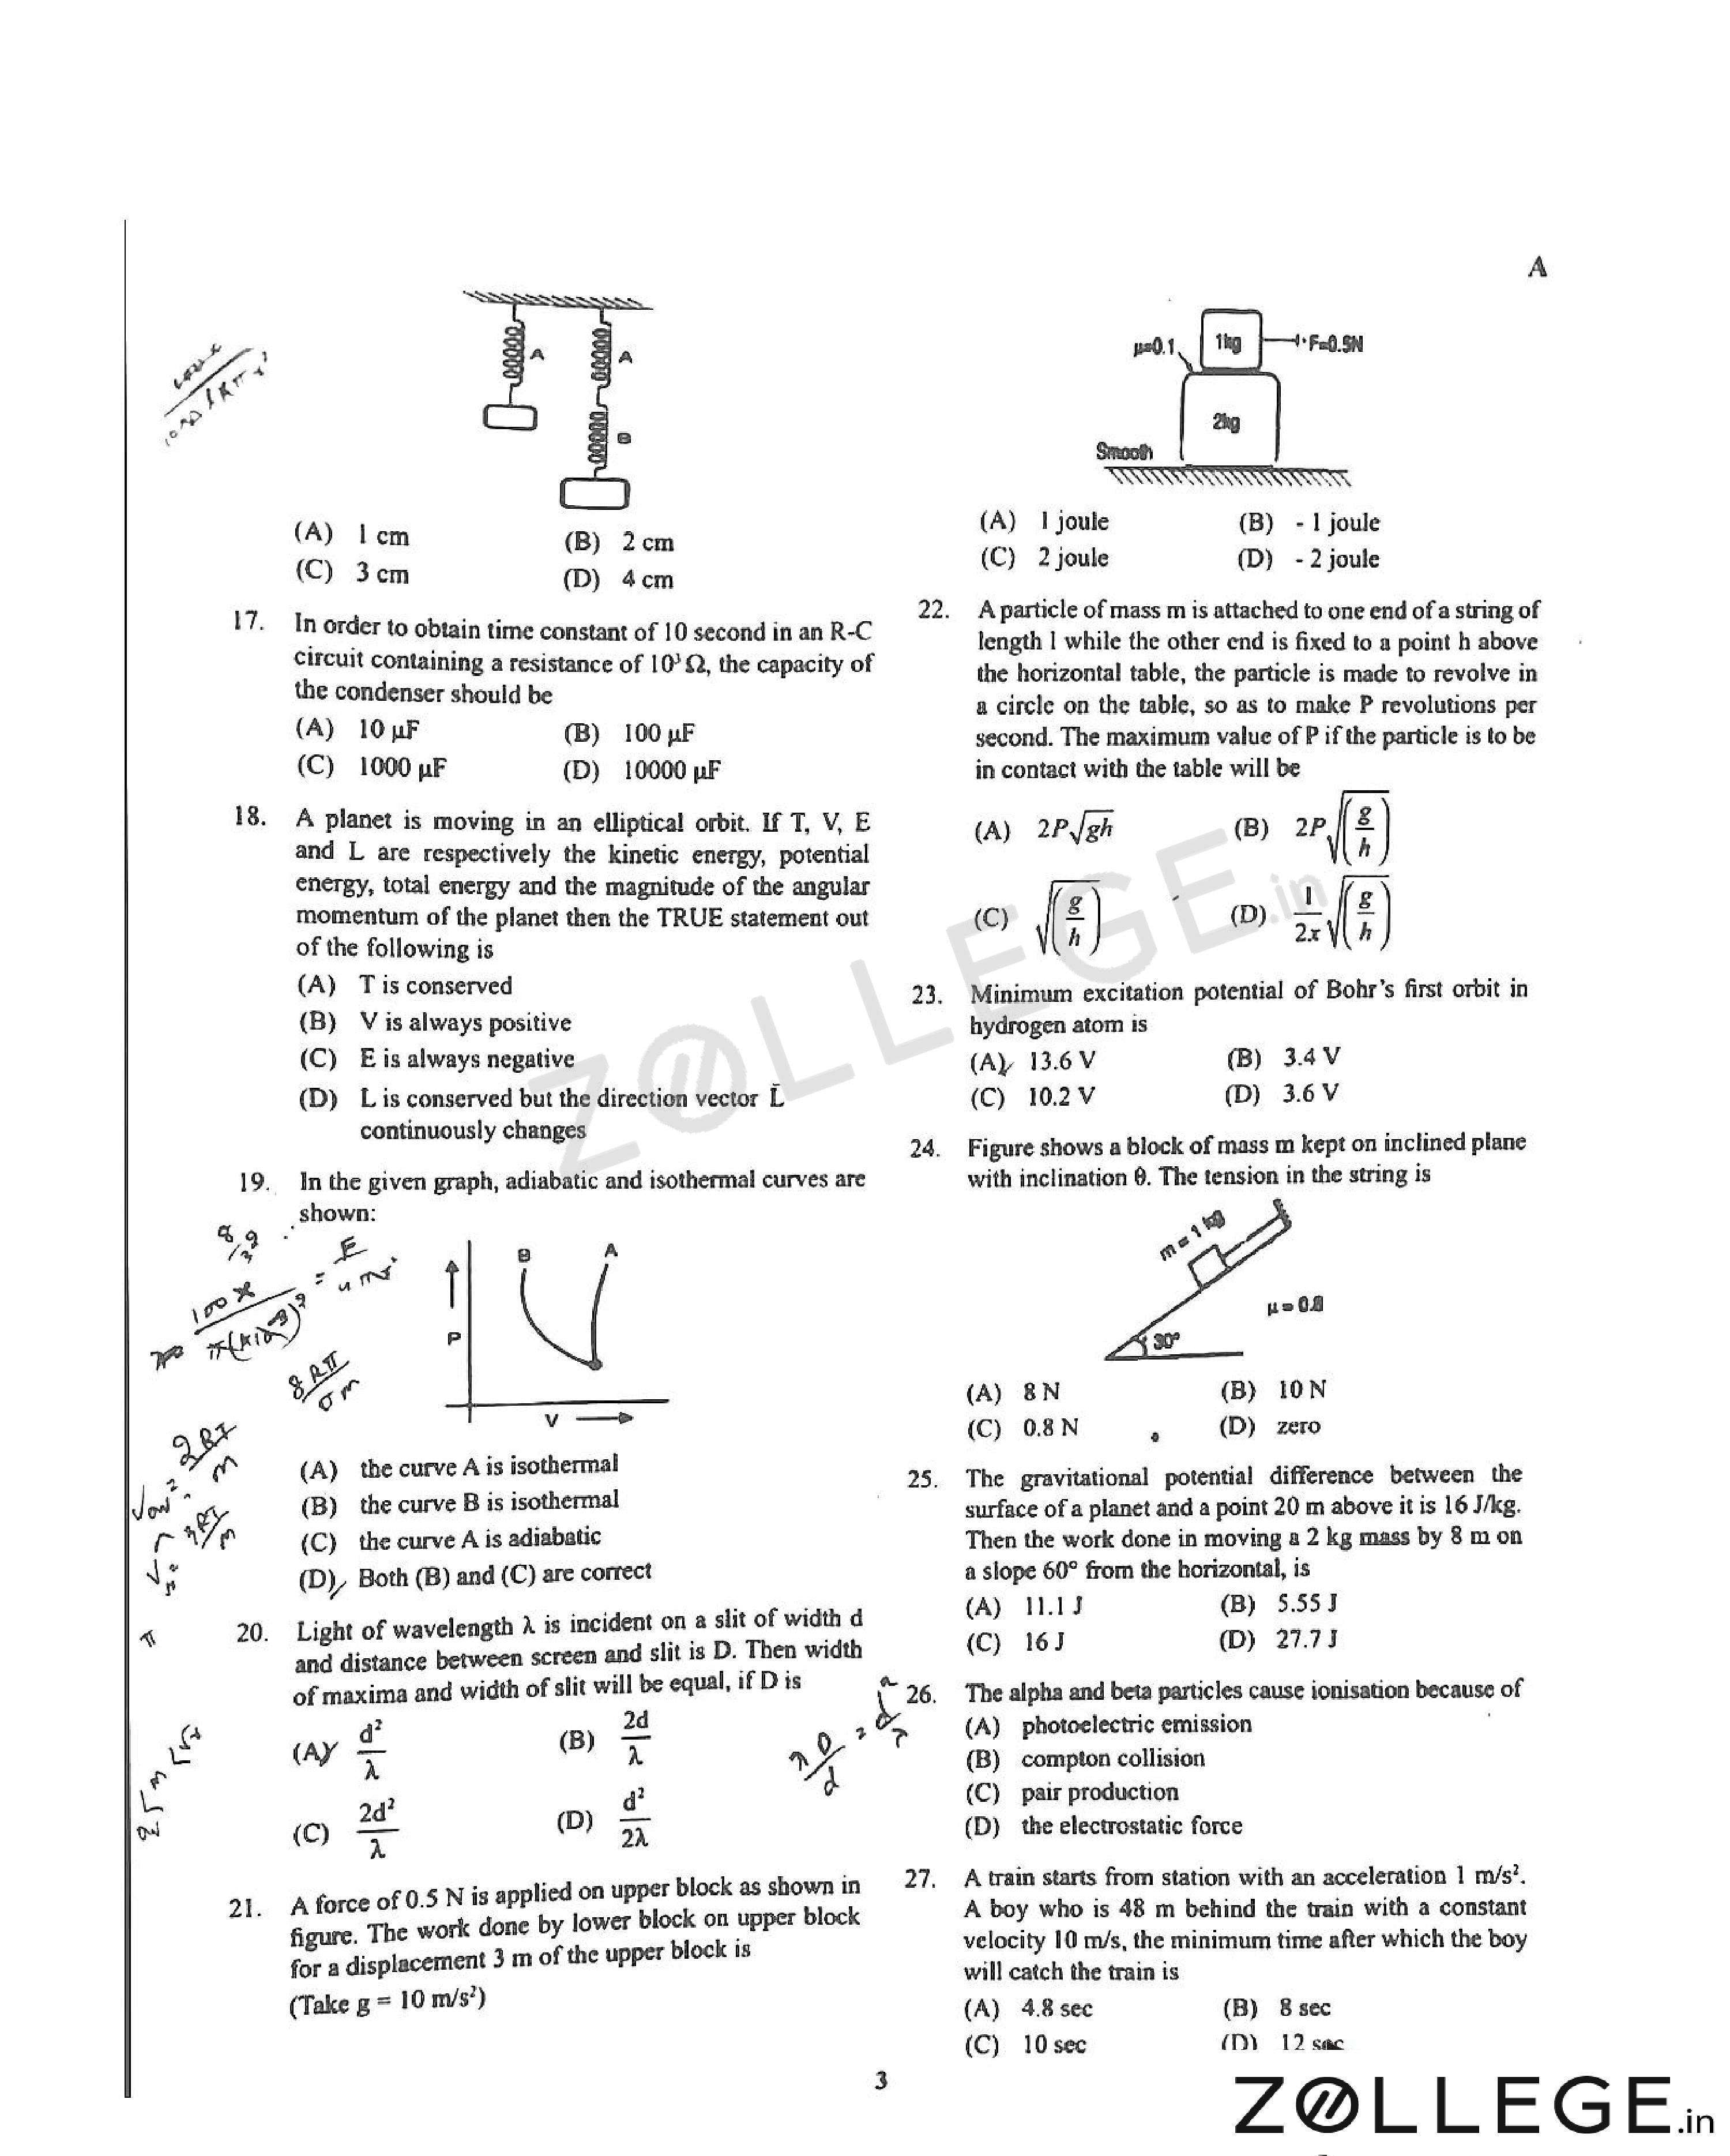 OUAT 2020 Question Paper with Answer Key PDF for (October 11)